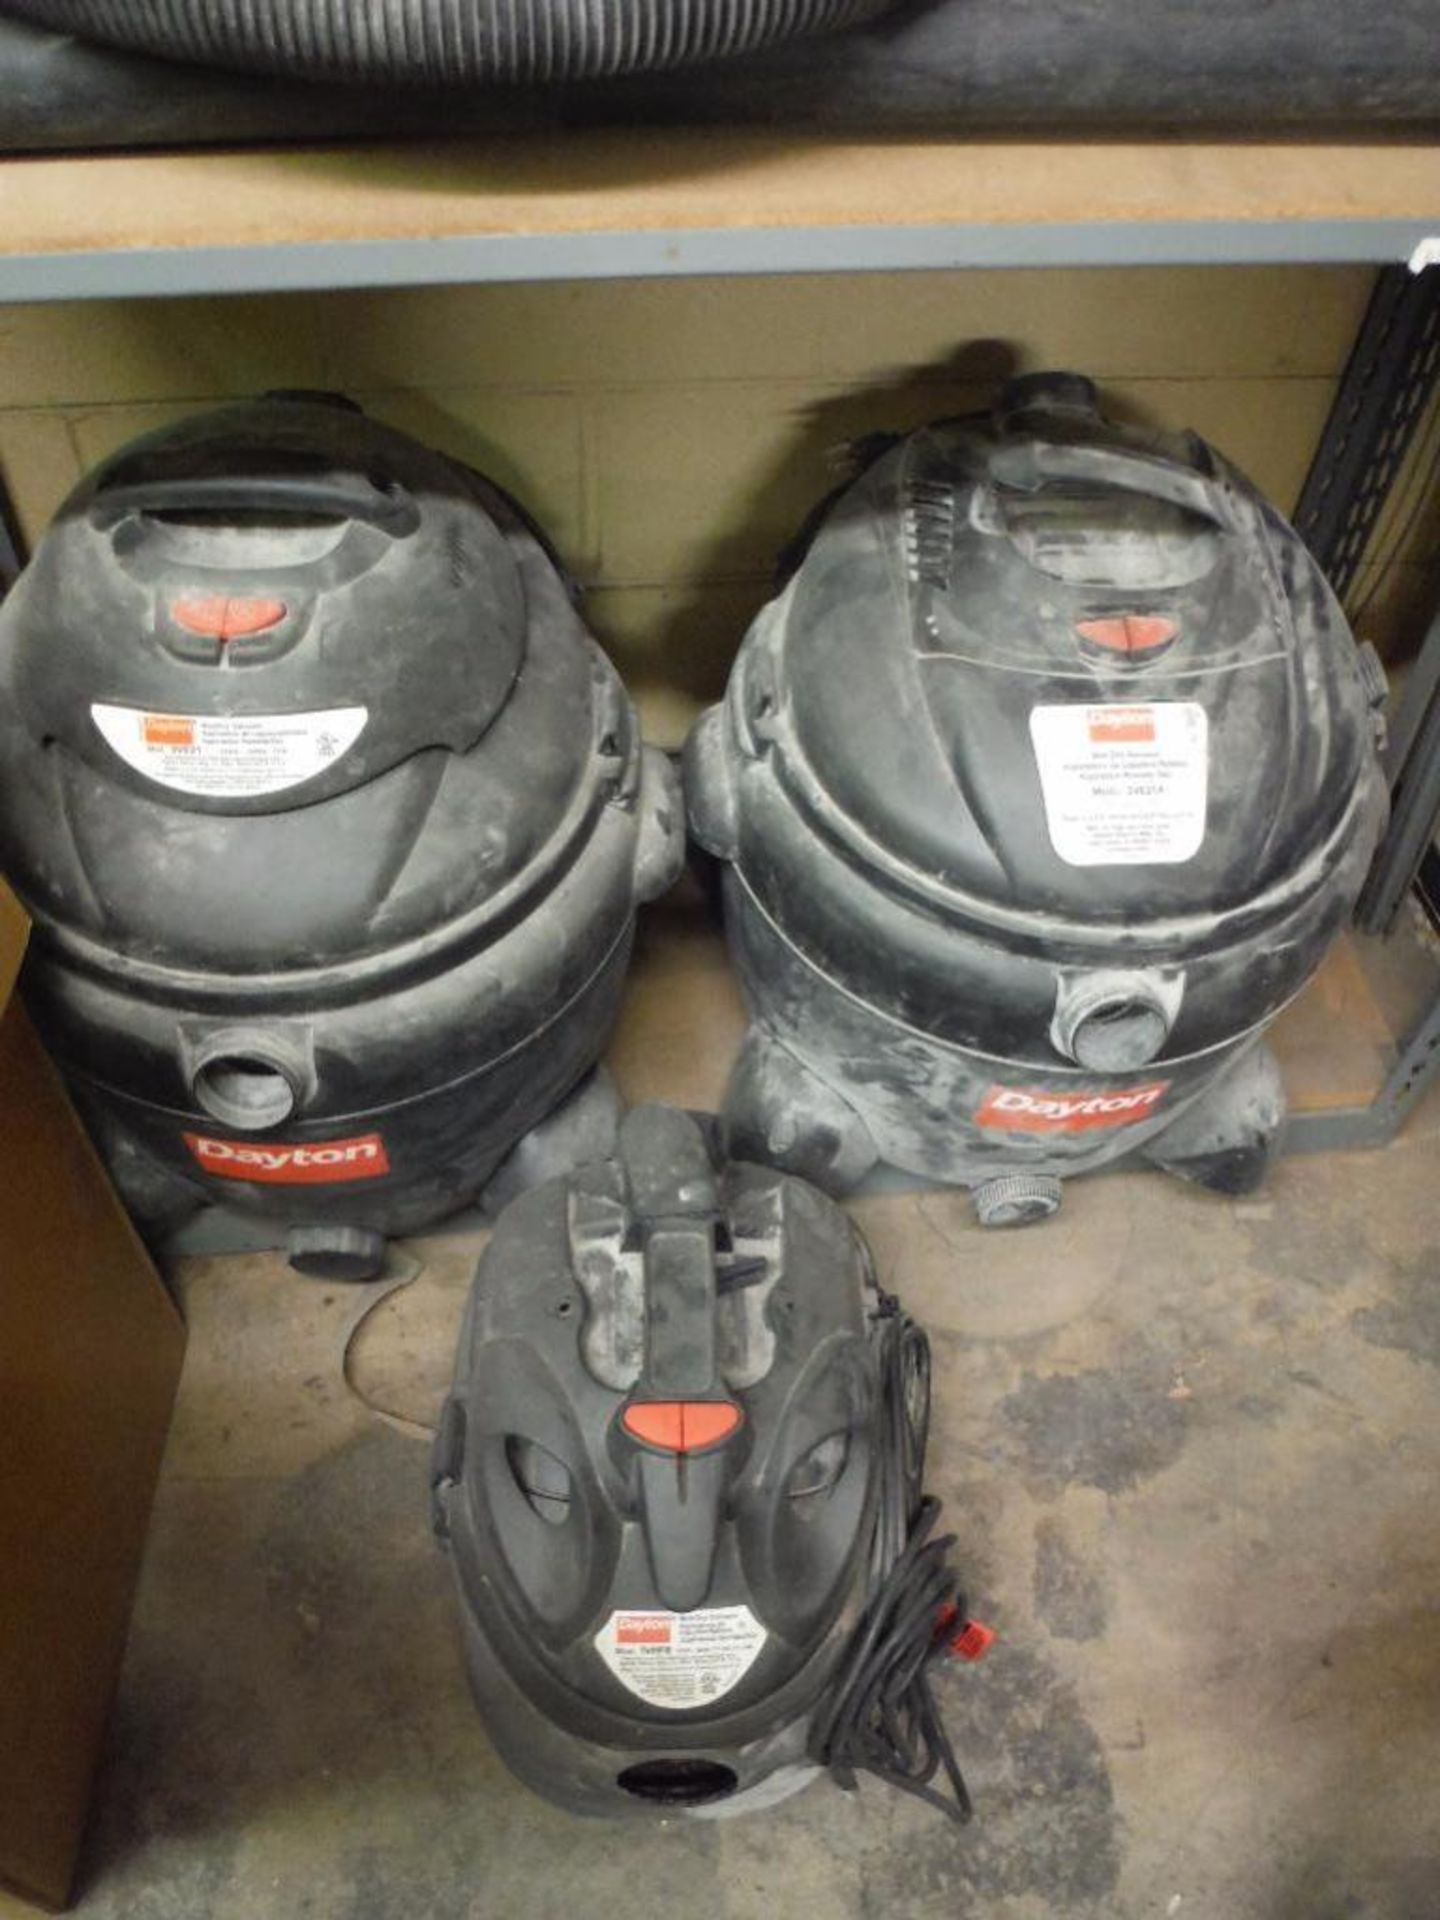 Contents of 1 sections of shelving, new in box Dayton shop vac, multiple used shop vacs ** Rigging - Image 4 of 12